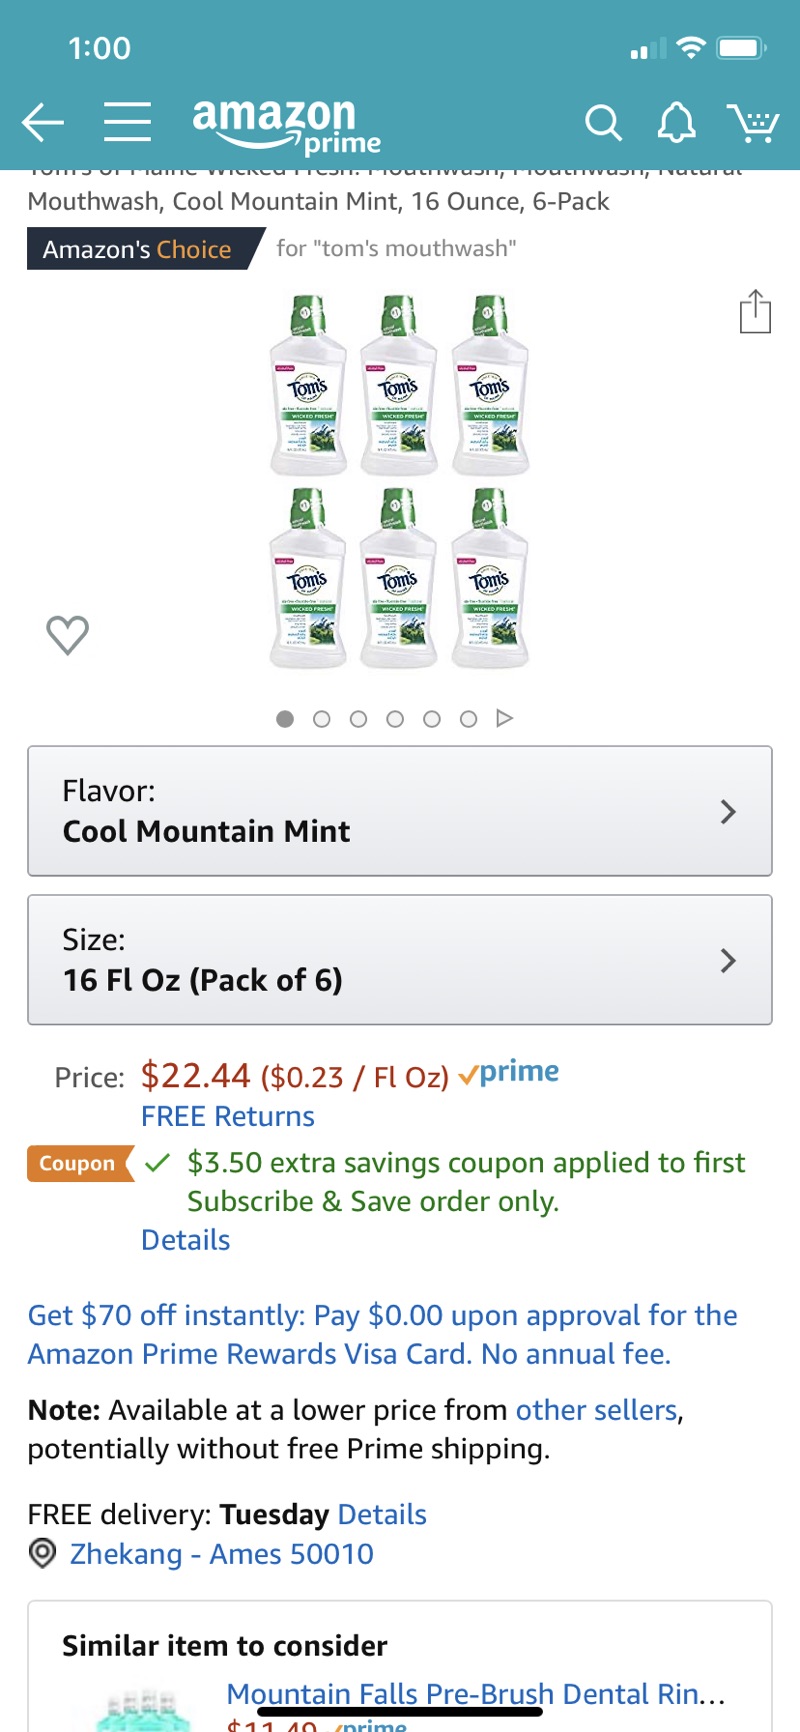 Amazon.com : Tom's of Maine Wicked Fresh! Mouthwash, Mouthwash, Natural Mouthwash, Cool Mountain Mint, 16 Ounce, 6-Pack : Beauty 缅因州的汤姆漱口水六瓶装